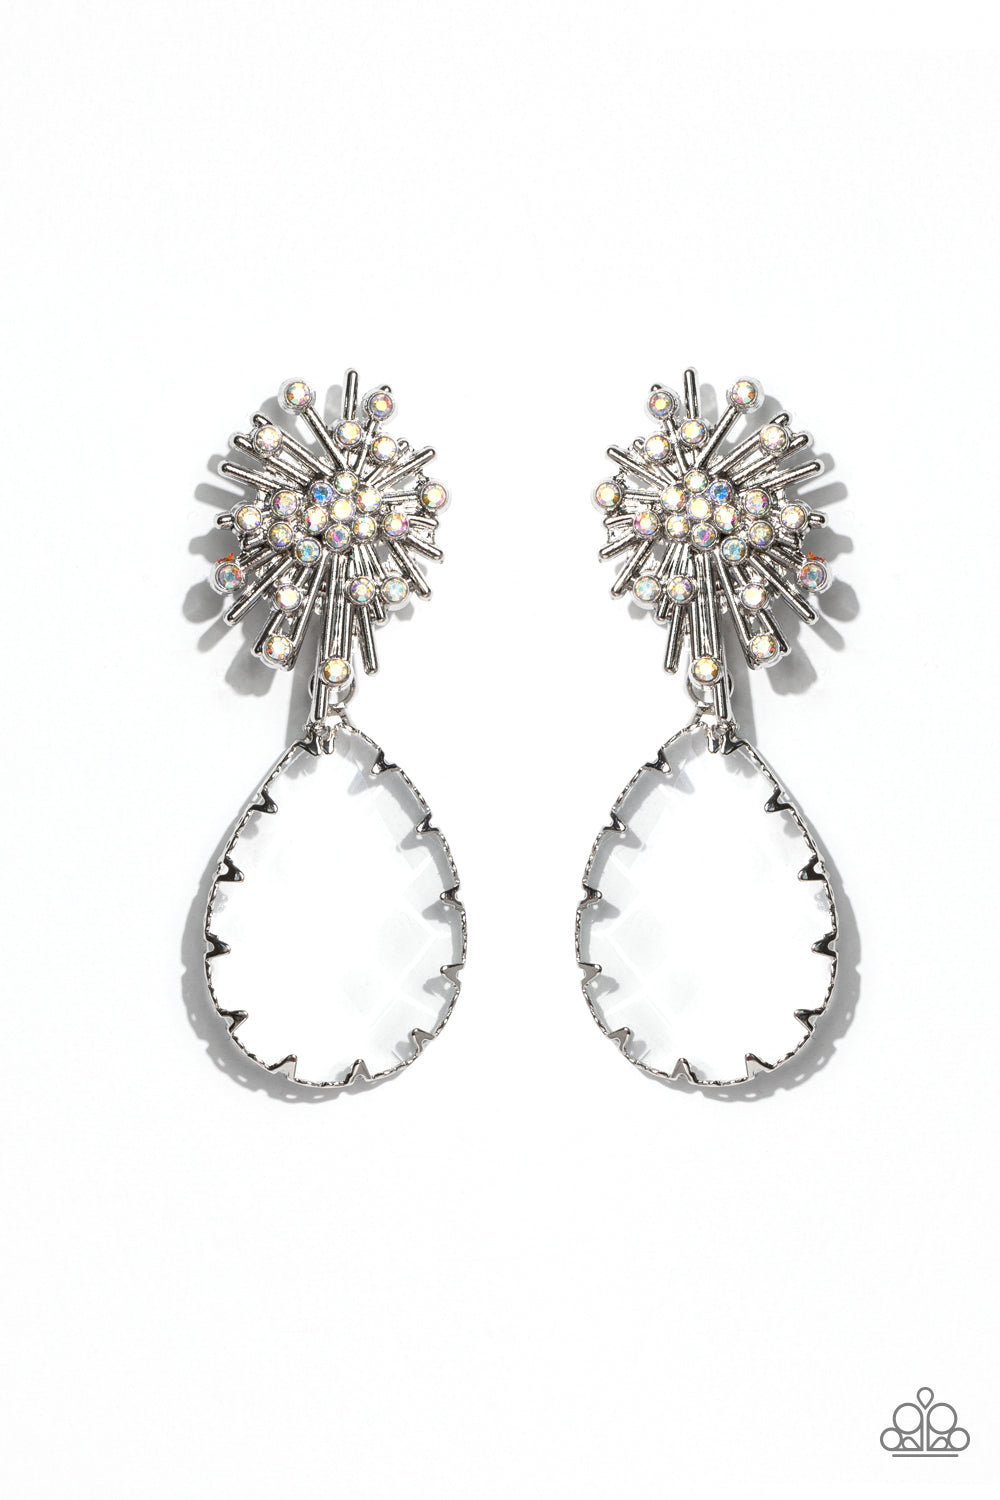 Paparazzi Accessories - Stellar Shooting Star - Multi Earrings an explosion of radiating silver bars is topped with a sprinkle of iridescent rhinestones, creating a stellar anchoring point. Swinging below the starburst, an oversized, clear teardrop with a light-catching, faceted surface is wrapped in a textured border of silver, adding stunning dimension and refinement to the cosmic combination. Earring attaches to a standard post fitting. Due to its prismatic palette, color may vary.